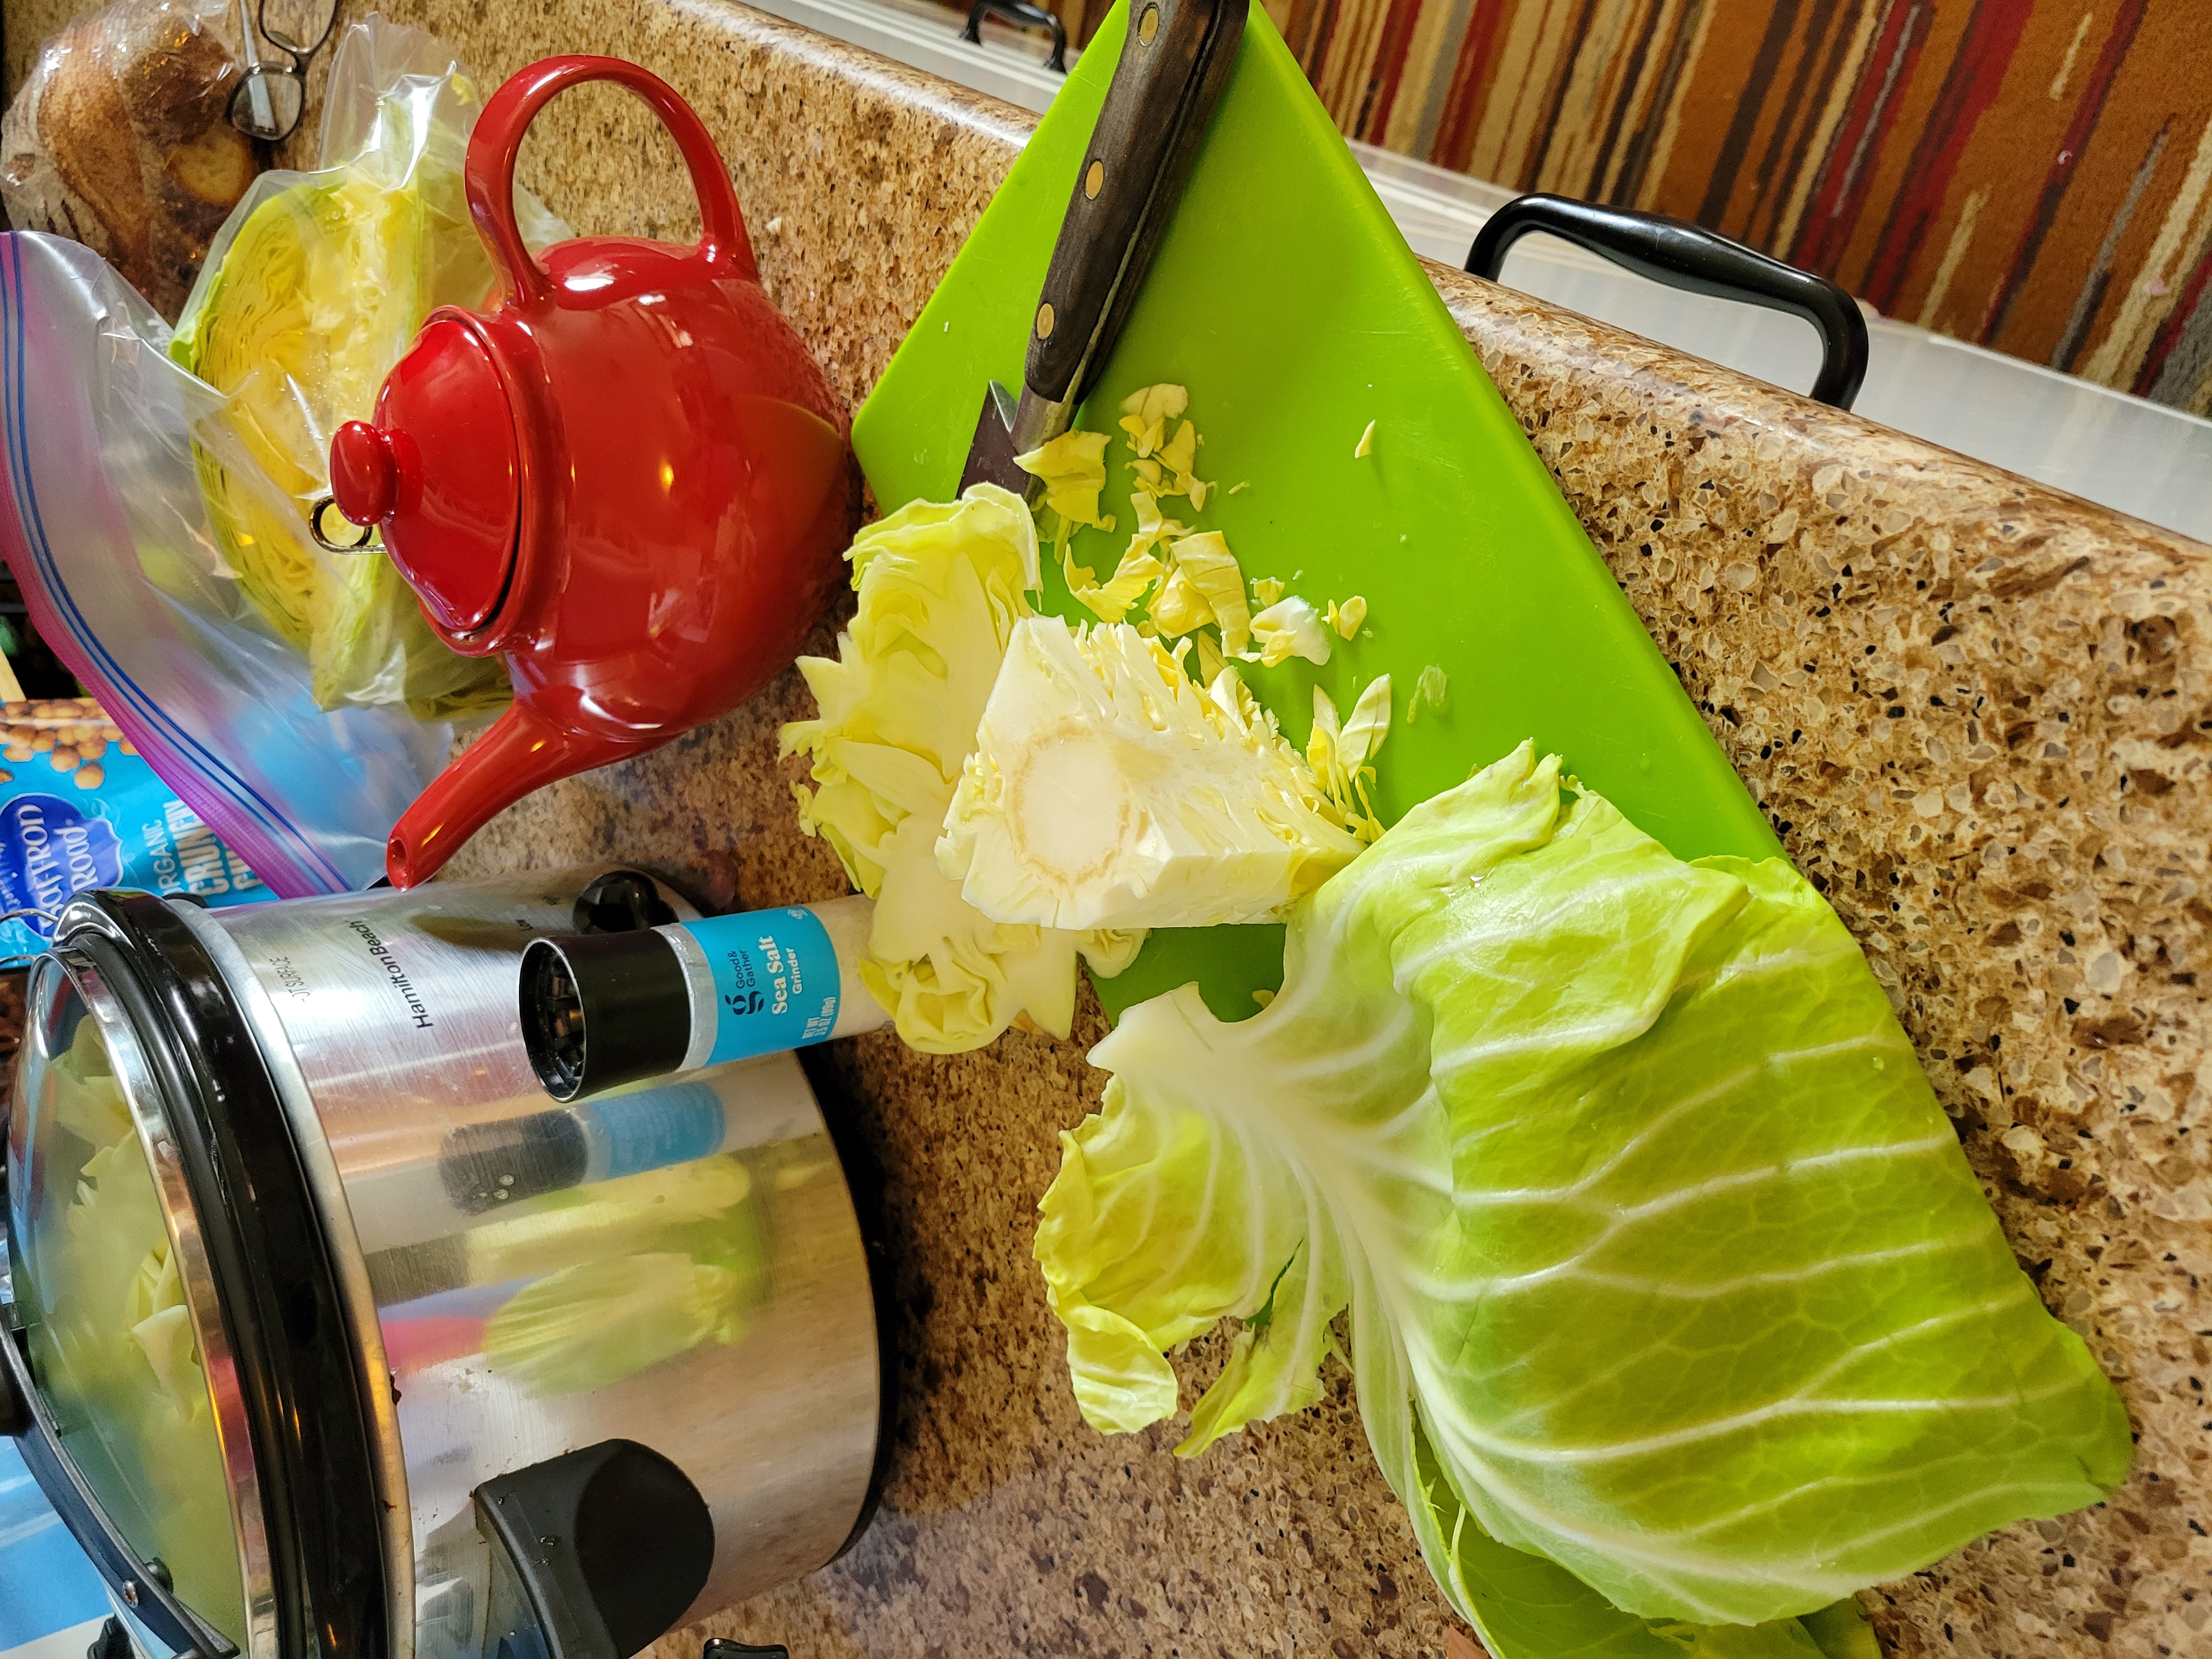 Cabbage trimmings, teapot